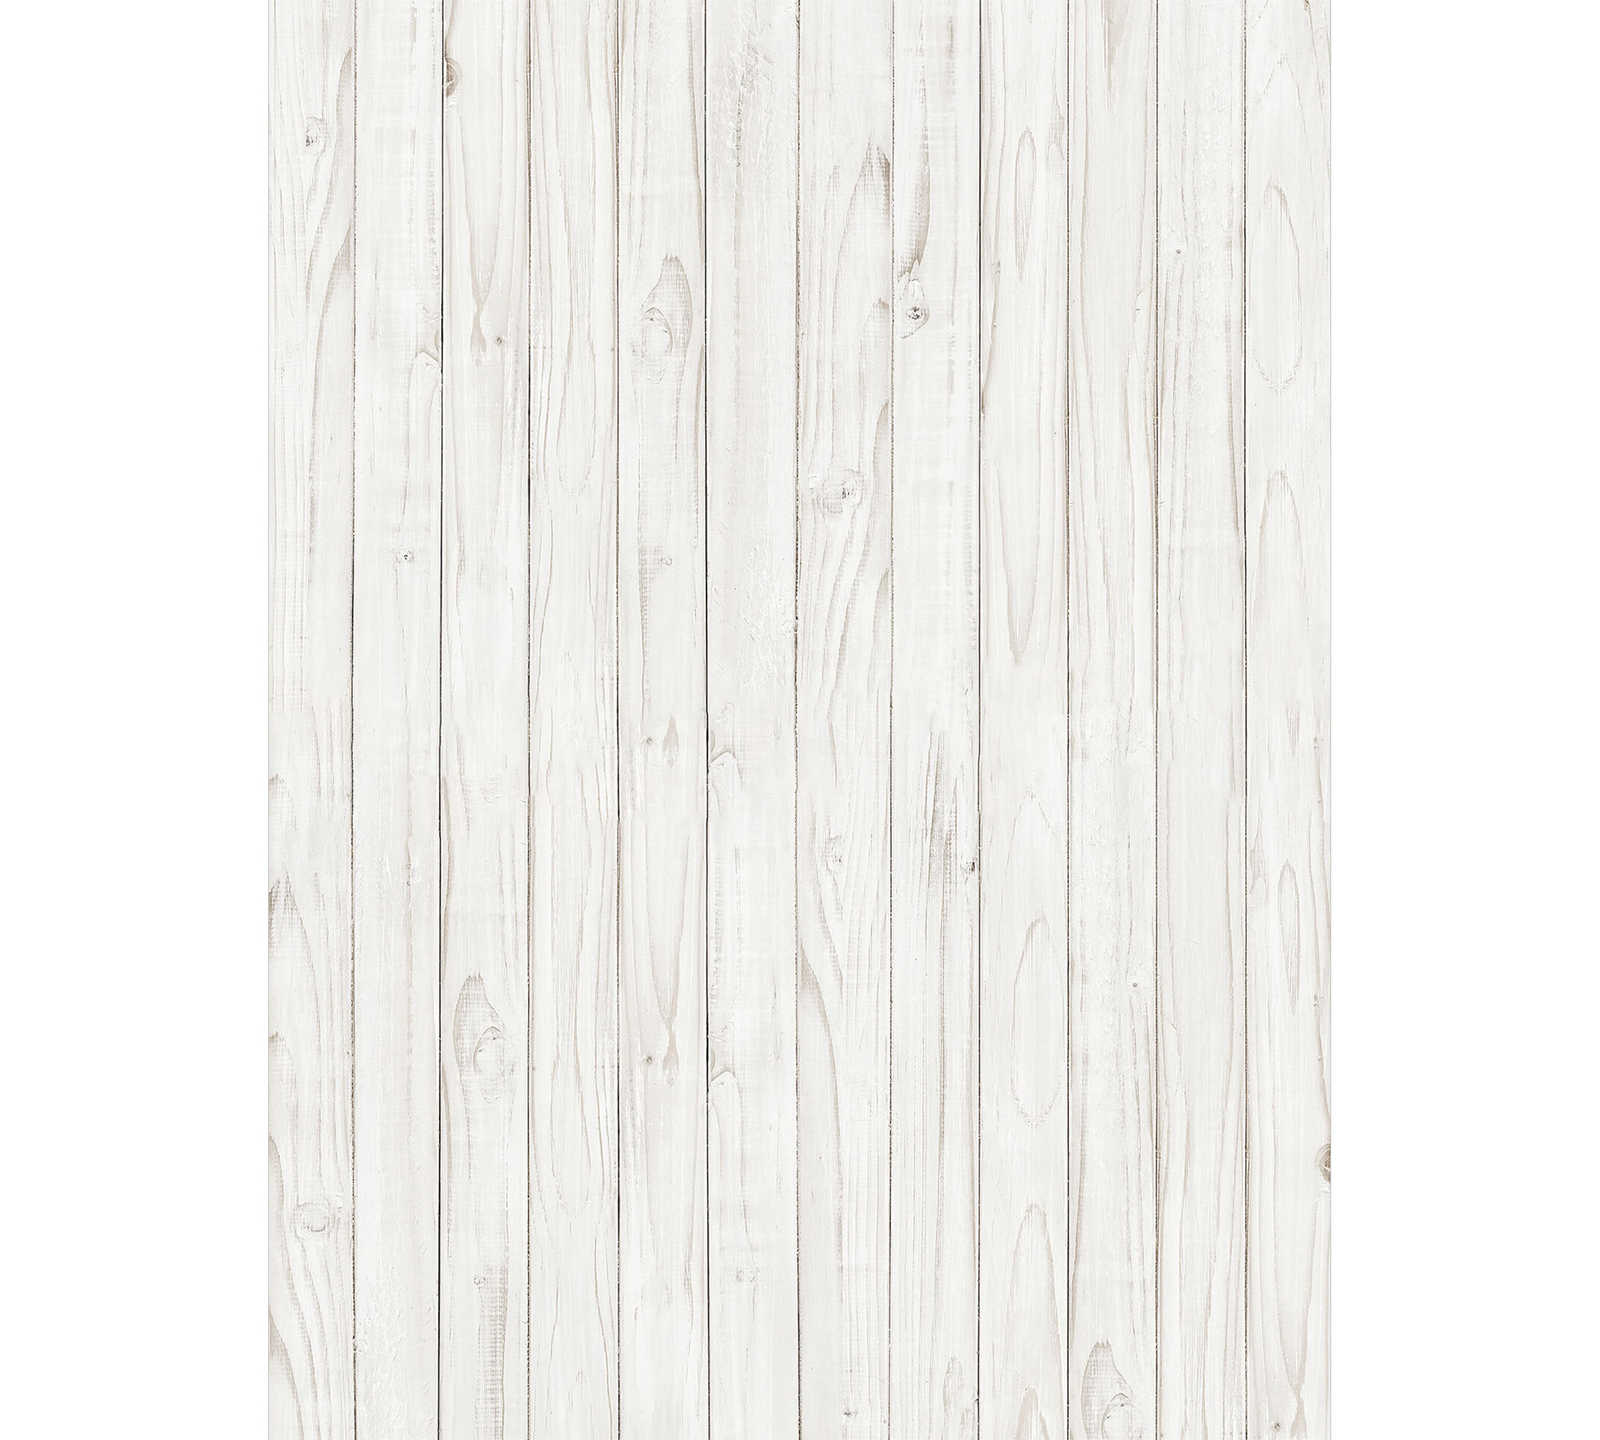         Photo wallpaper 3D wood look wall - white, grey
    